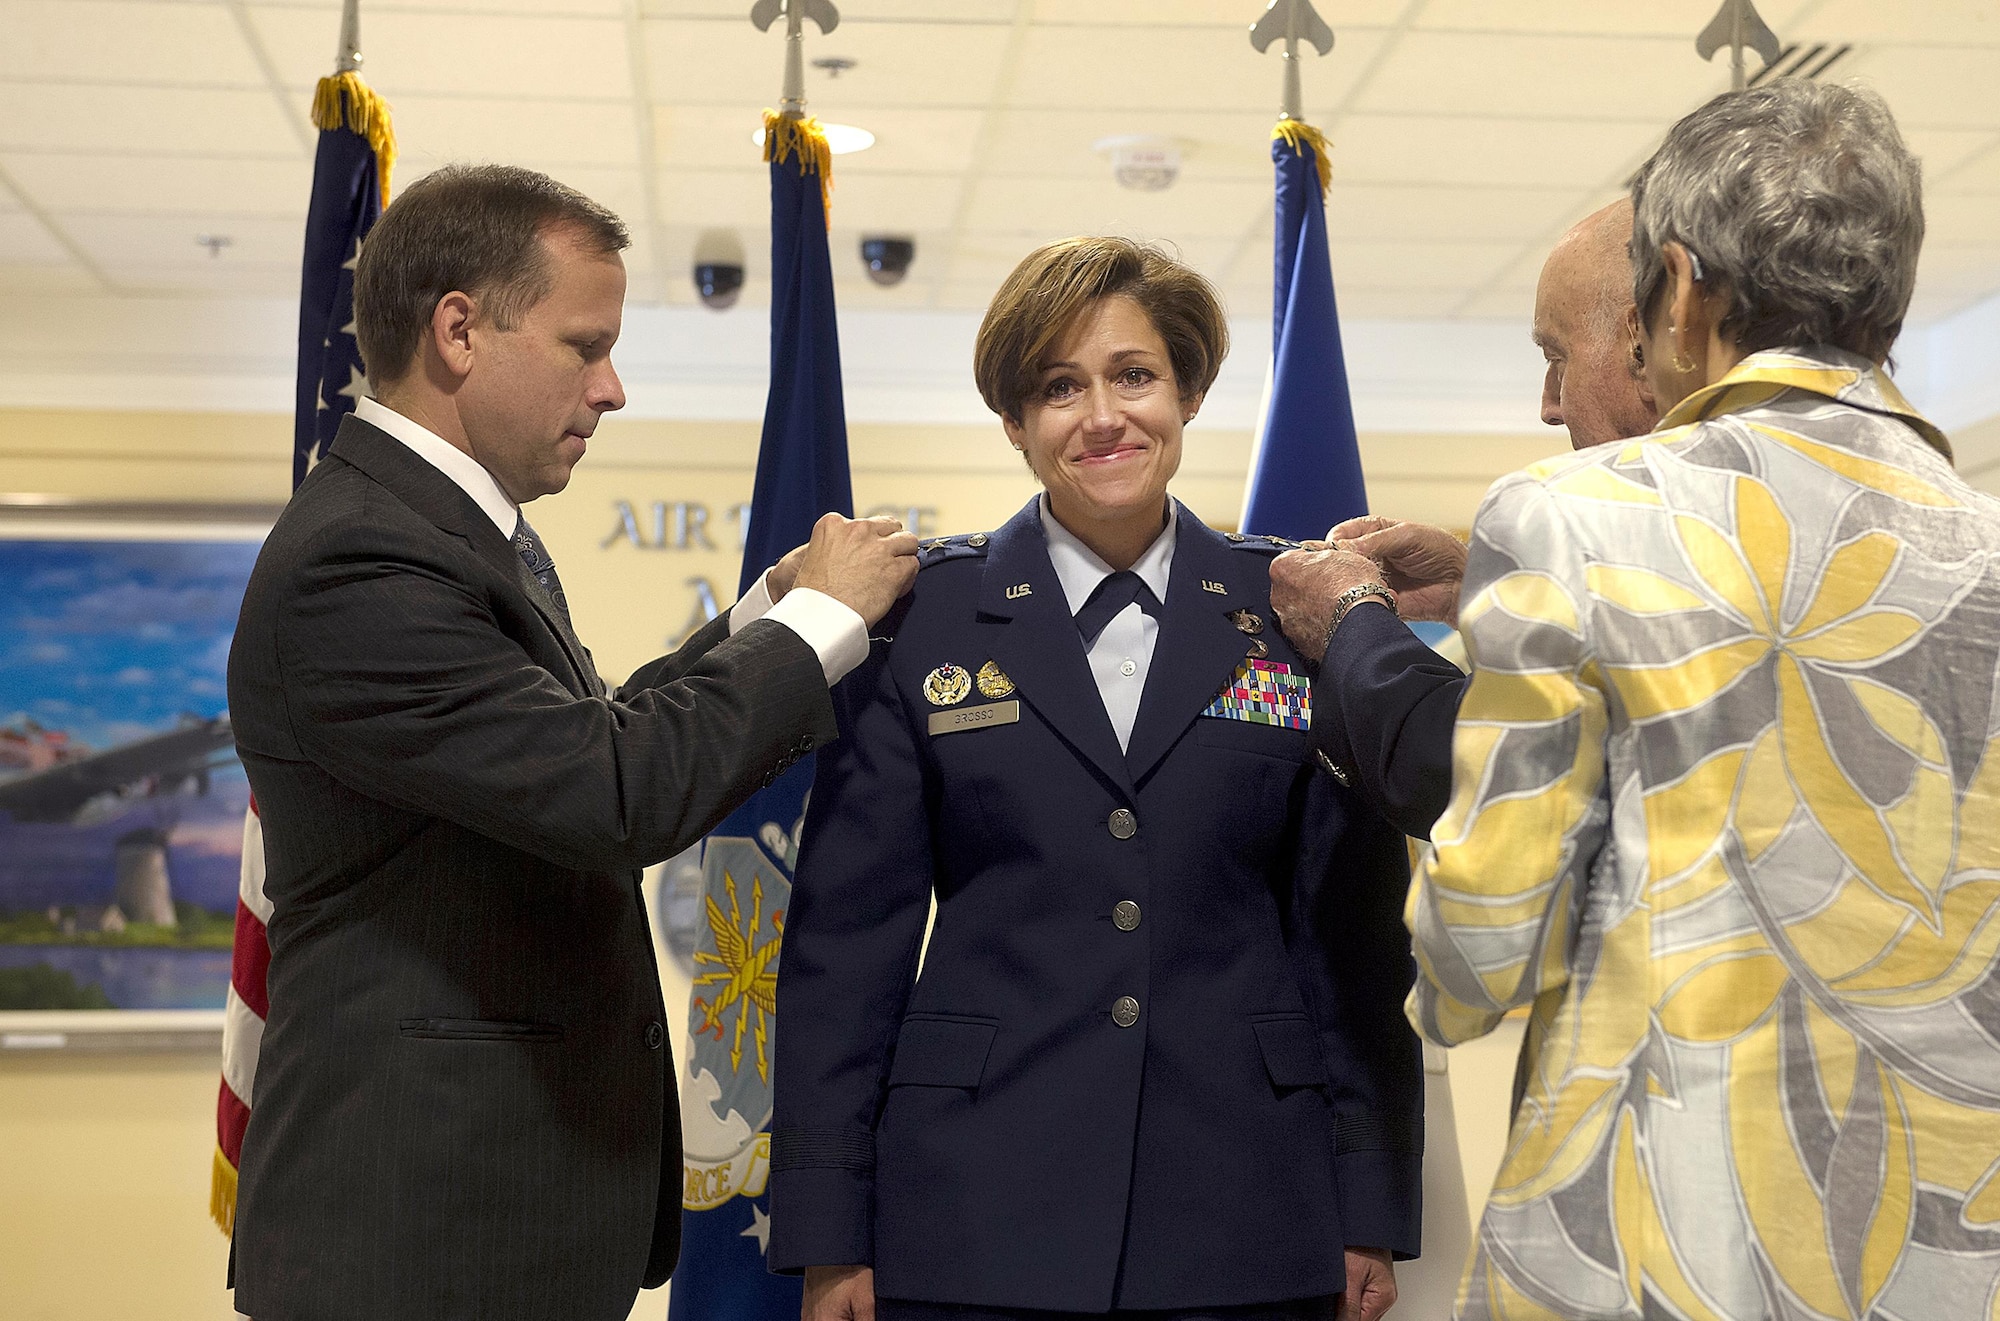 Retired Air Force Col. Brian O'Connor, Dr. Camille Grosso, and retired Air Force Lt. Col. Gerry Grosso help pin Lt. Gen. Gina Grosso's new rank during her promotion ceremony in the Pentagon, Nov. 16, 2015. Grosso is the 31st Airman to serve as the Air Force's deputy chief of staff for manpower, personnel and services in the 47 years of the position's existence.  (U.S. Air Force photo/Jim Varhegyi)